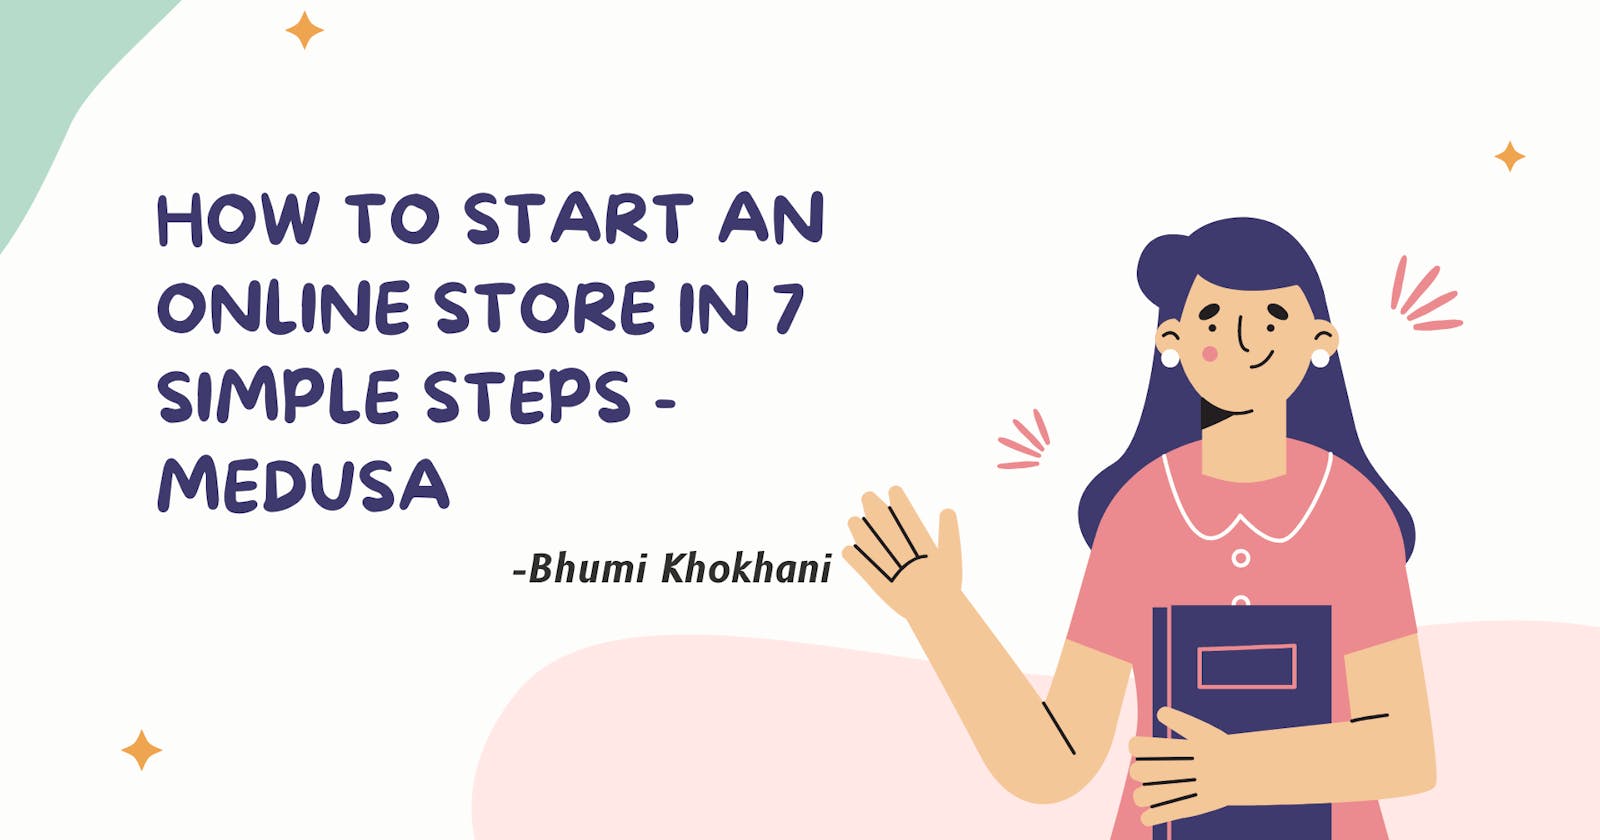 How to start an online store in 7 simple steps - Medusa.